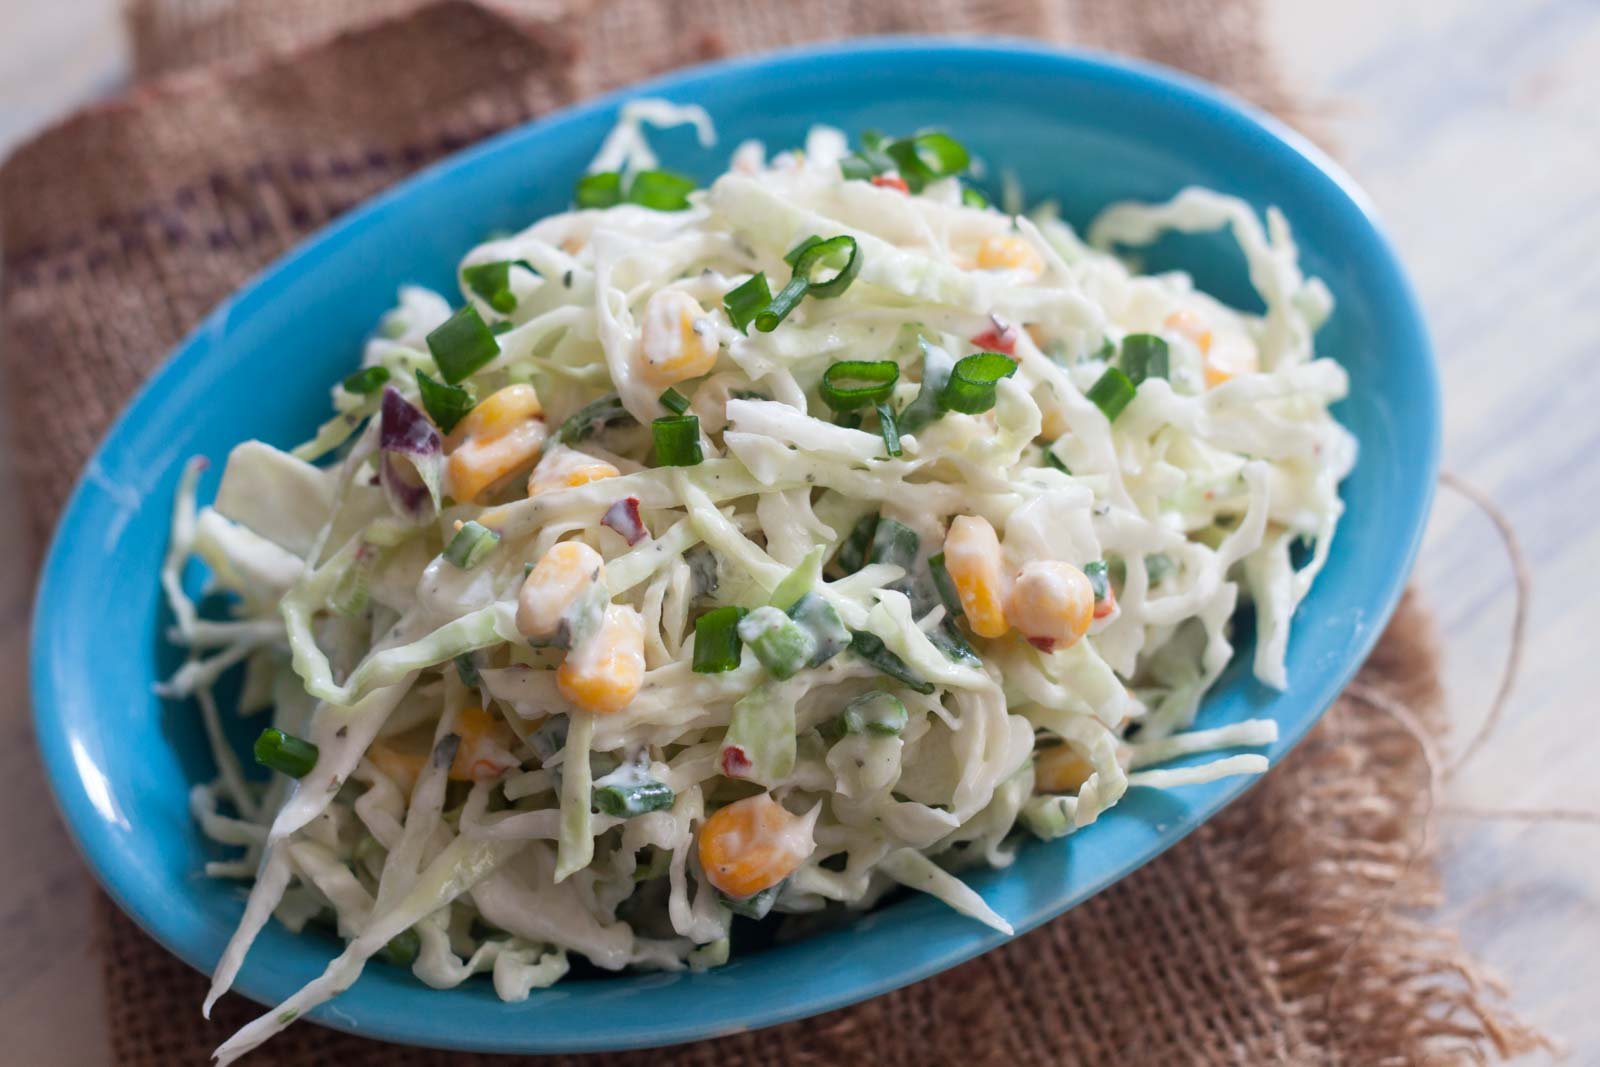 Creamy Cabbage, Sweet Corn Cole Slaw with Hung Curd Recipe